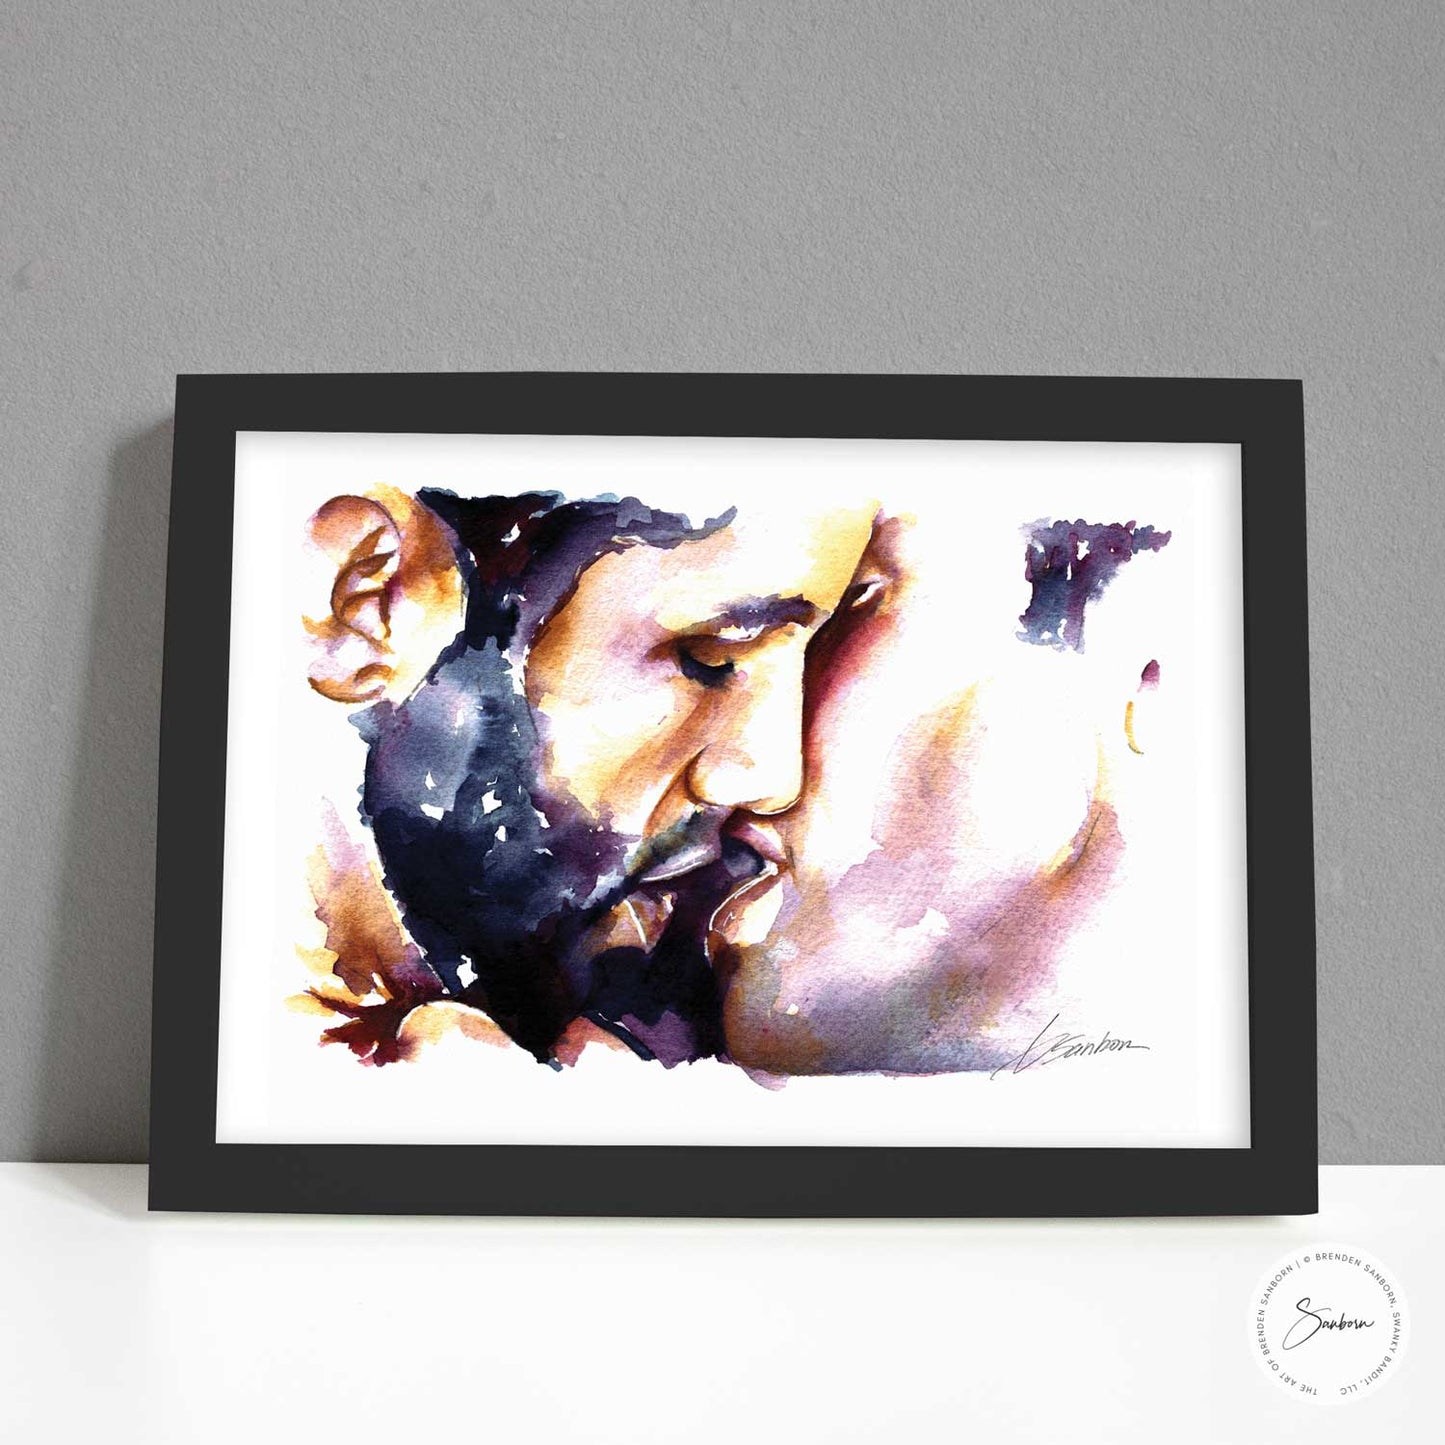 He Said it All With His Kiss - Love Between Two Men - Giclee Art Print